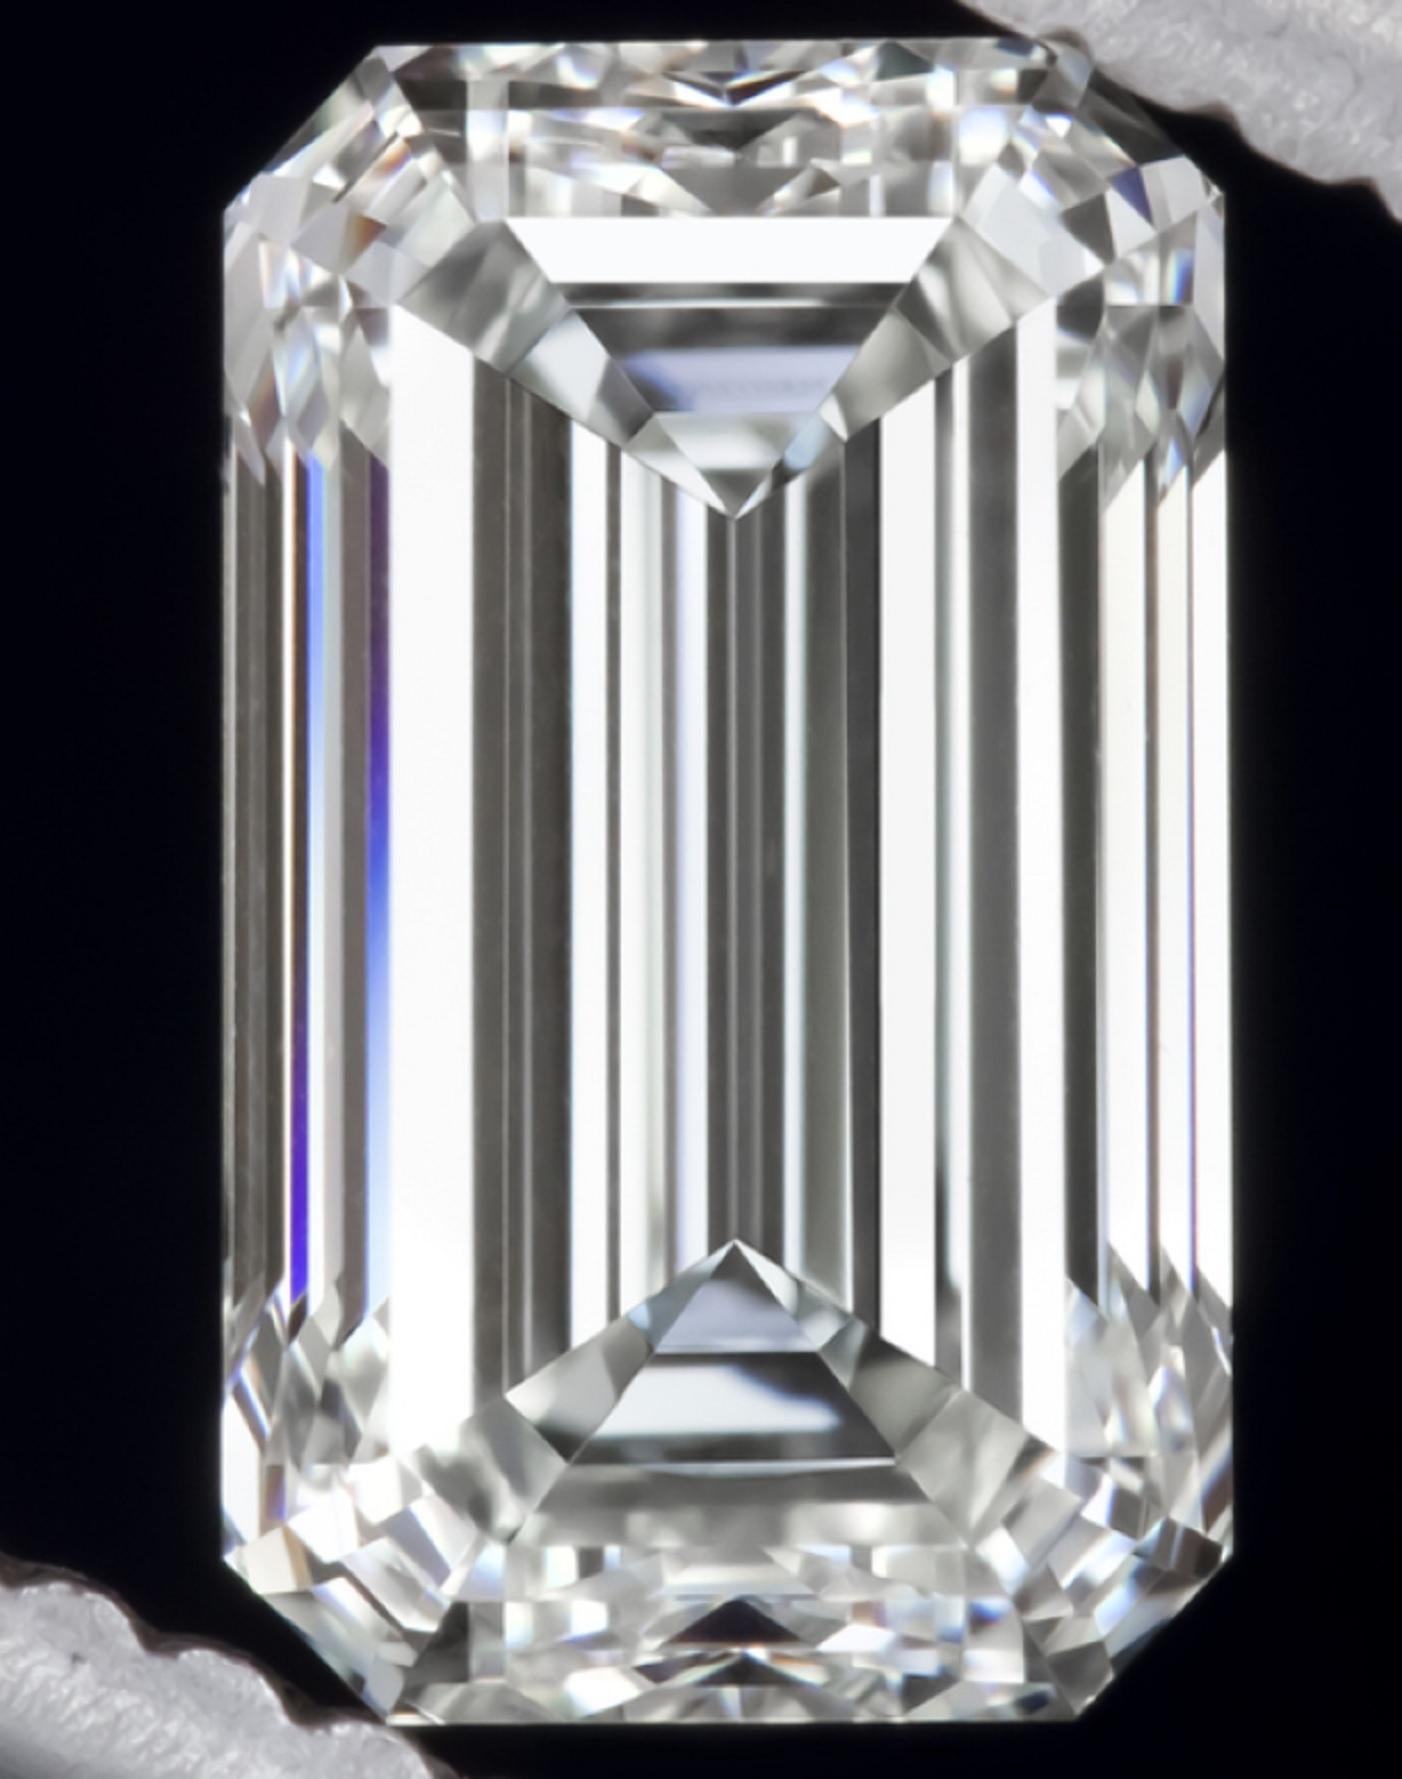 This lovely and rare ring centers on a 2.53 carat emerald-cut diamond with vs1  clarity. This stone is flanked by two emerald cut diamonds.

This diamond also has the perfect proportions the ideal emerald cut diamond should have.

Nowdays Emerald